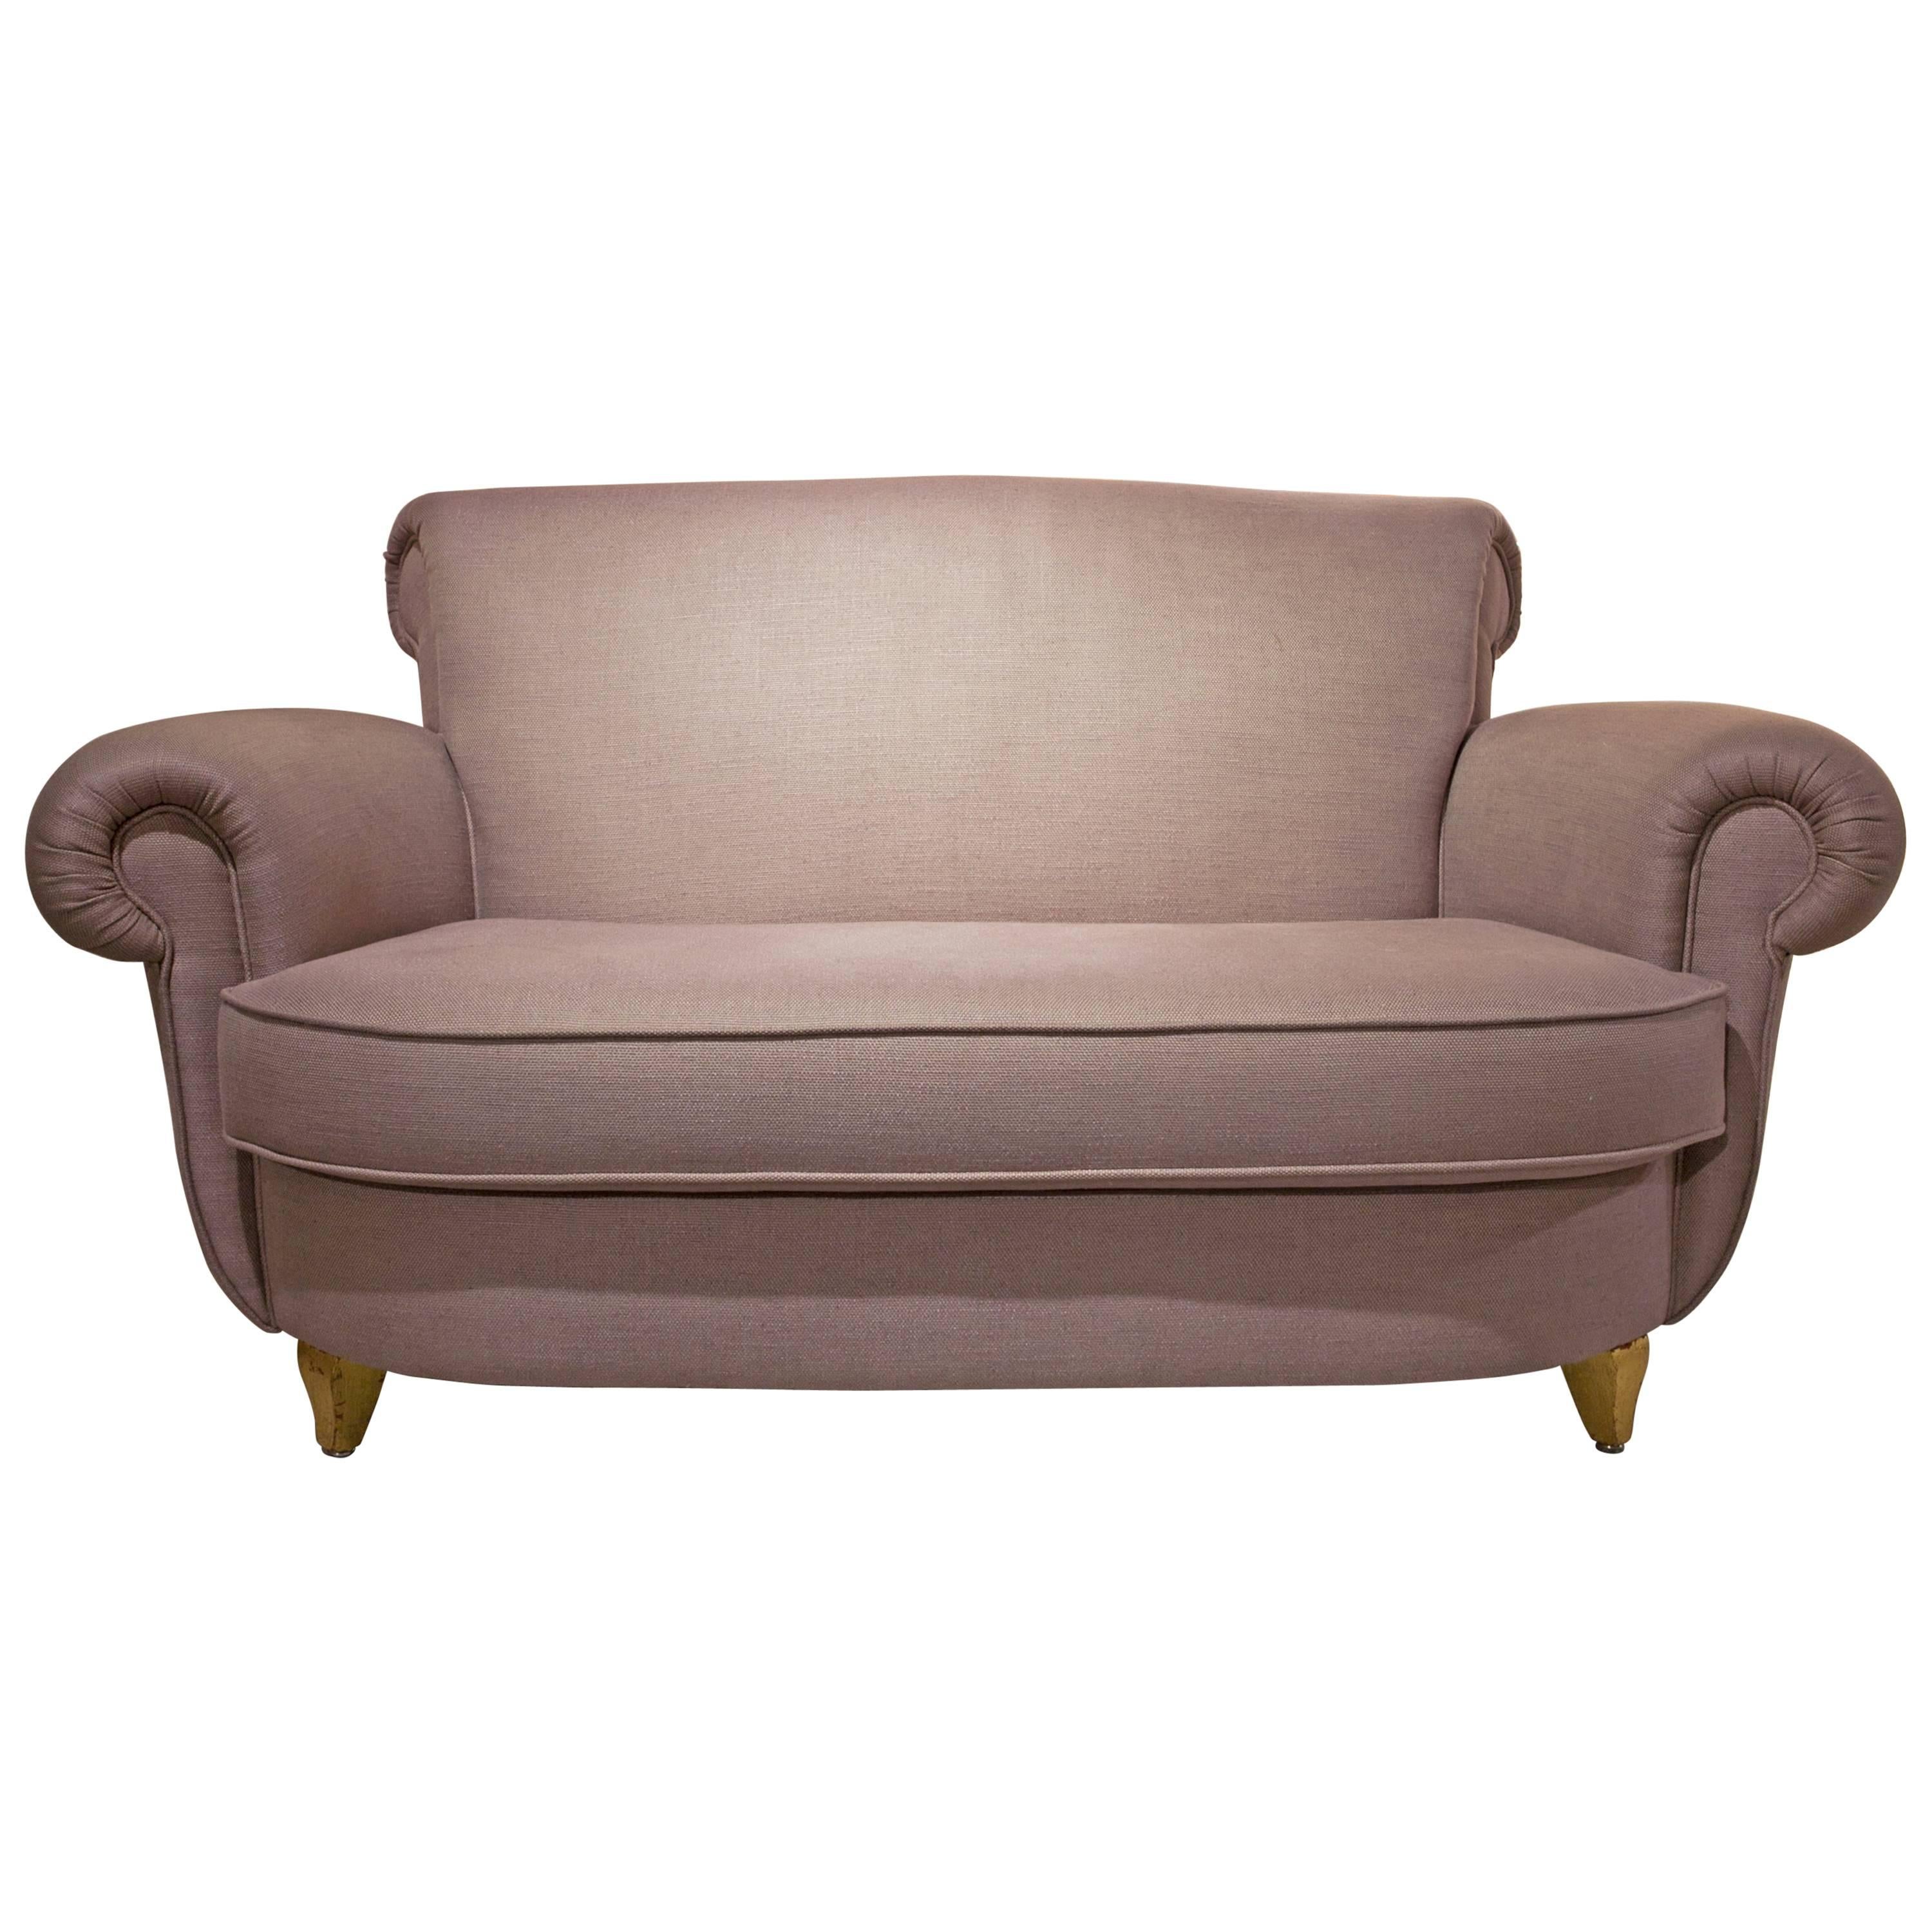 1940s Mid-Century Modern Mauve French Lounge Suite in Velvet For Sale